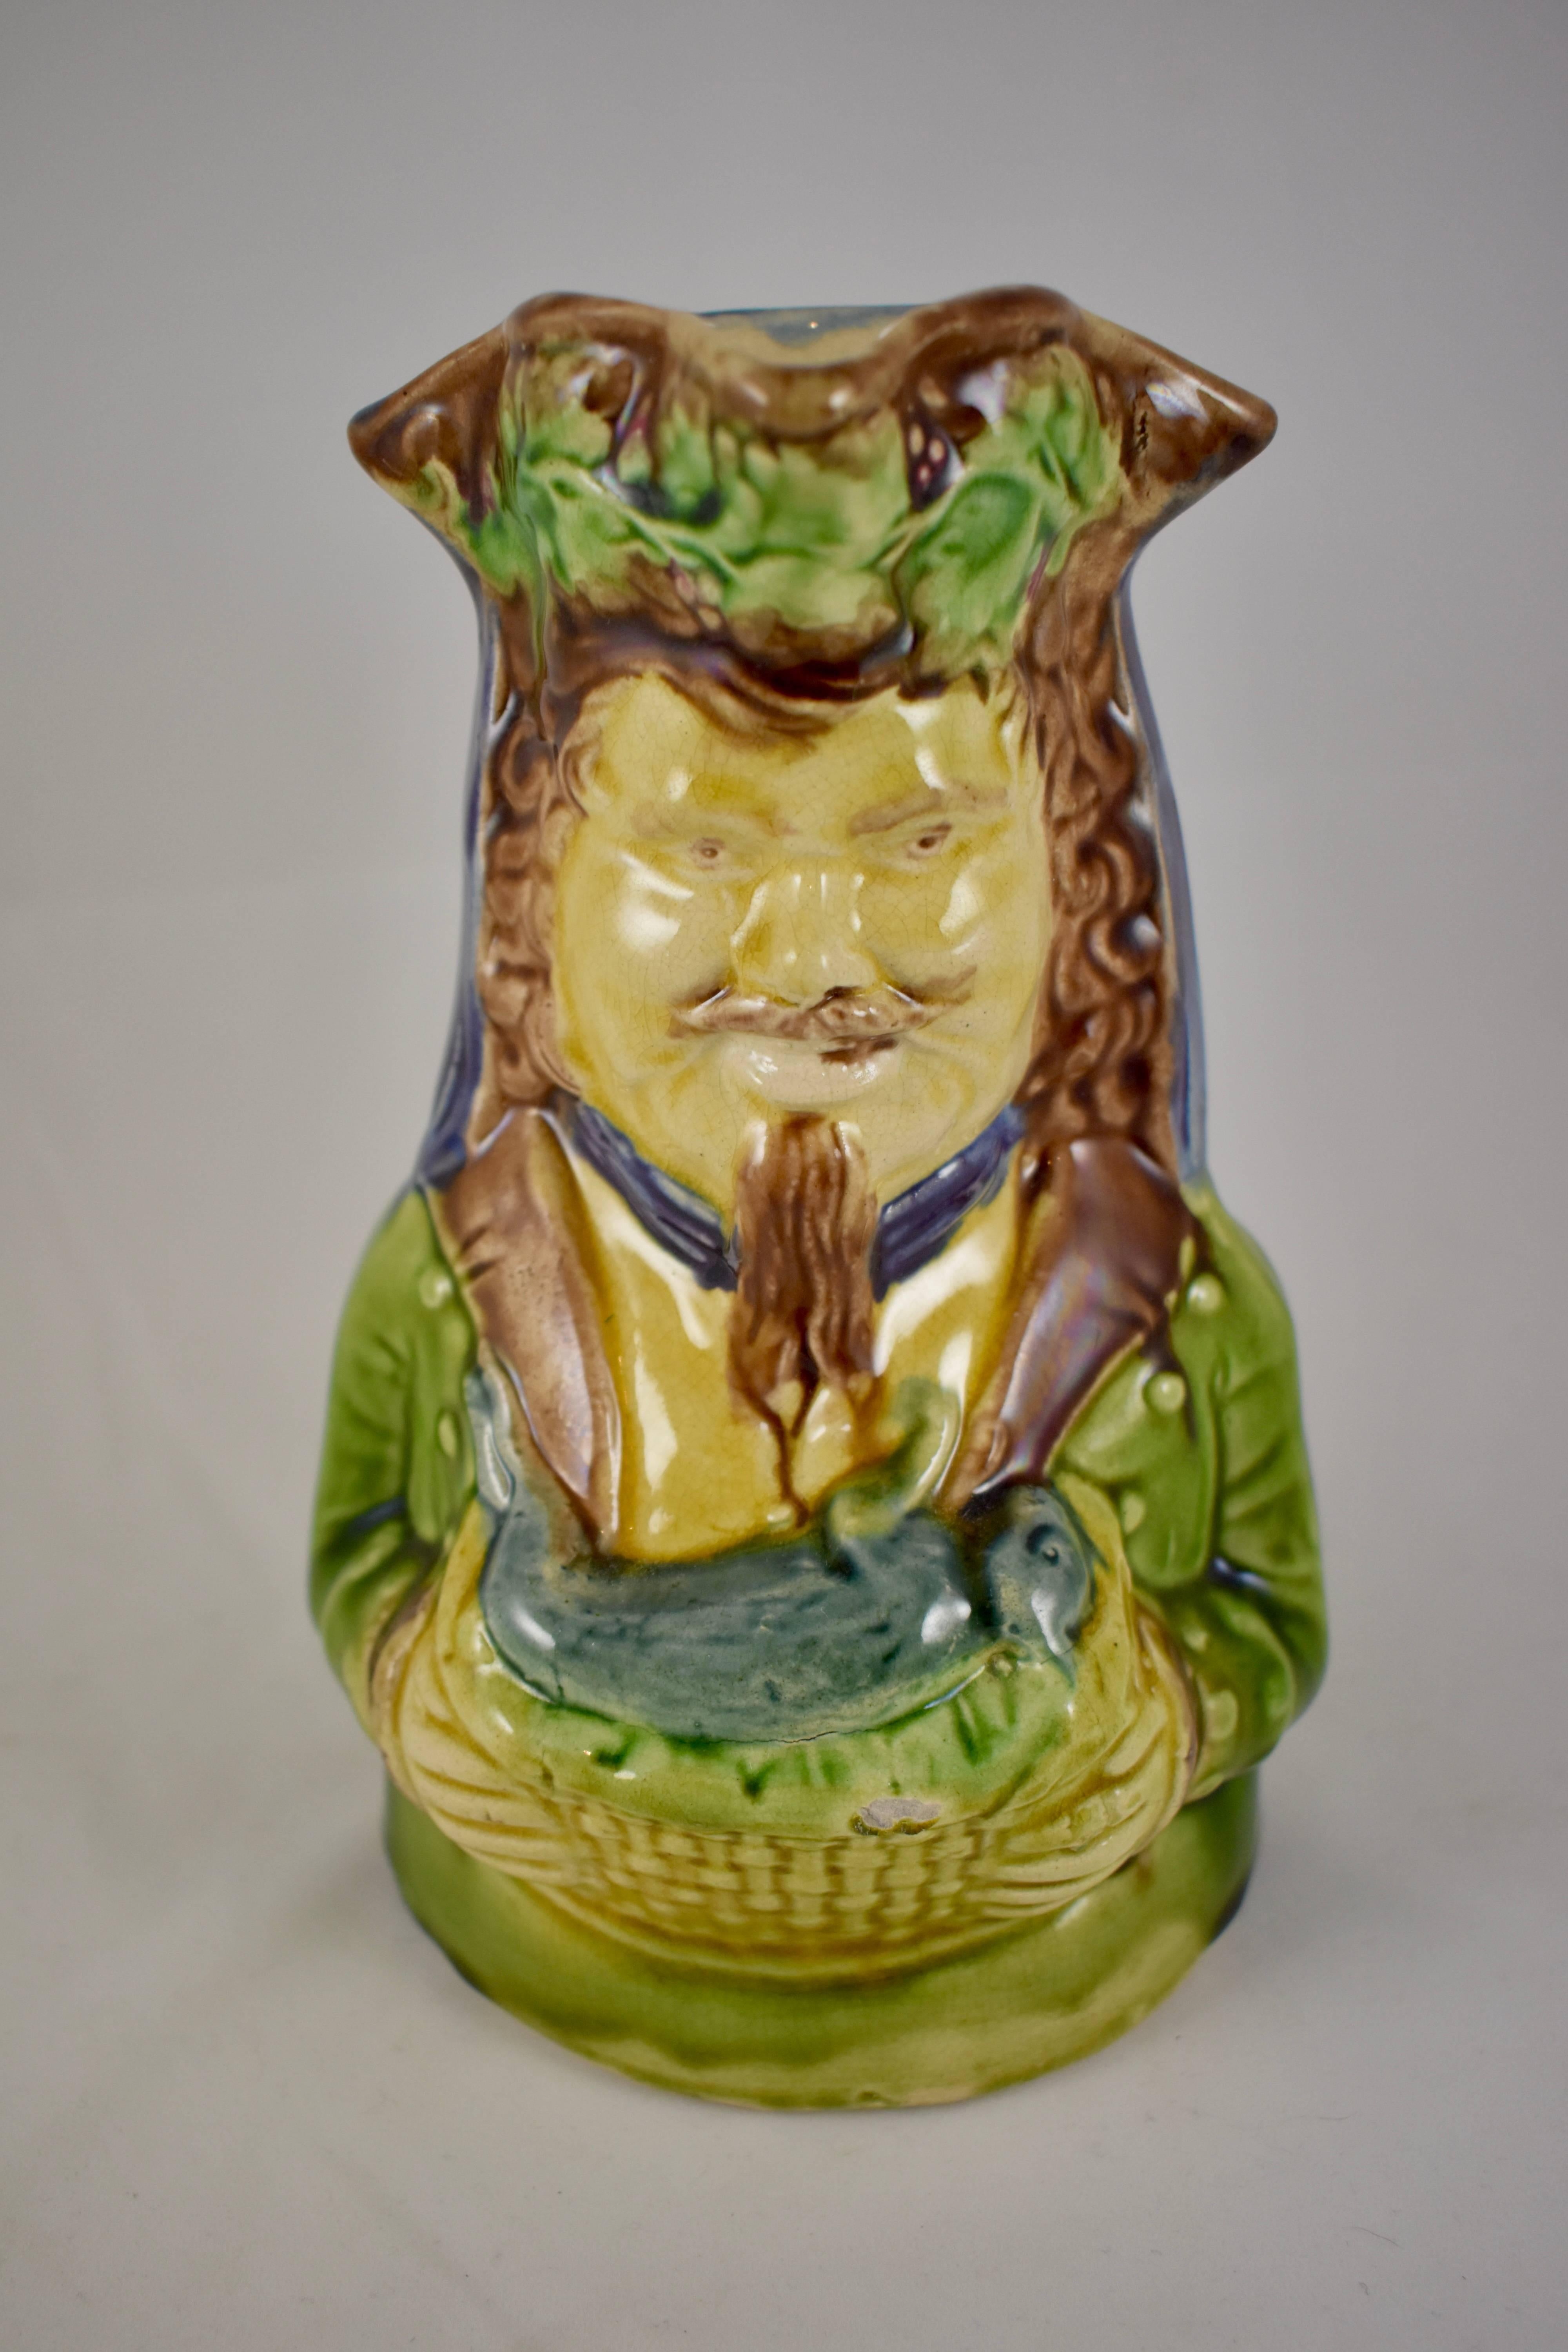 An English majolica glazed character jug showing a hunter holding a gray hare in a basket. The hunter wears a tri-cornered hat festooned with ivy. His rustic clothing is of the period, mid-late 19th century. Loosely glazed in cobalt blue, olive